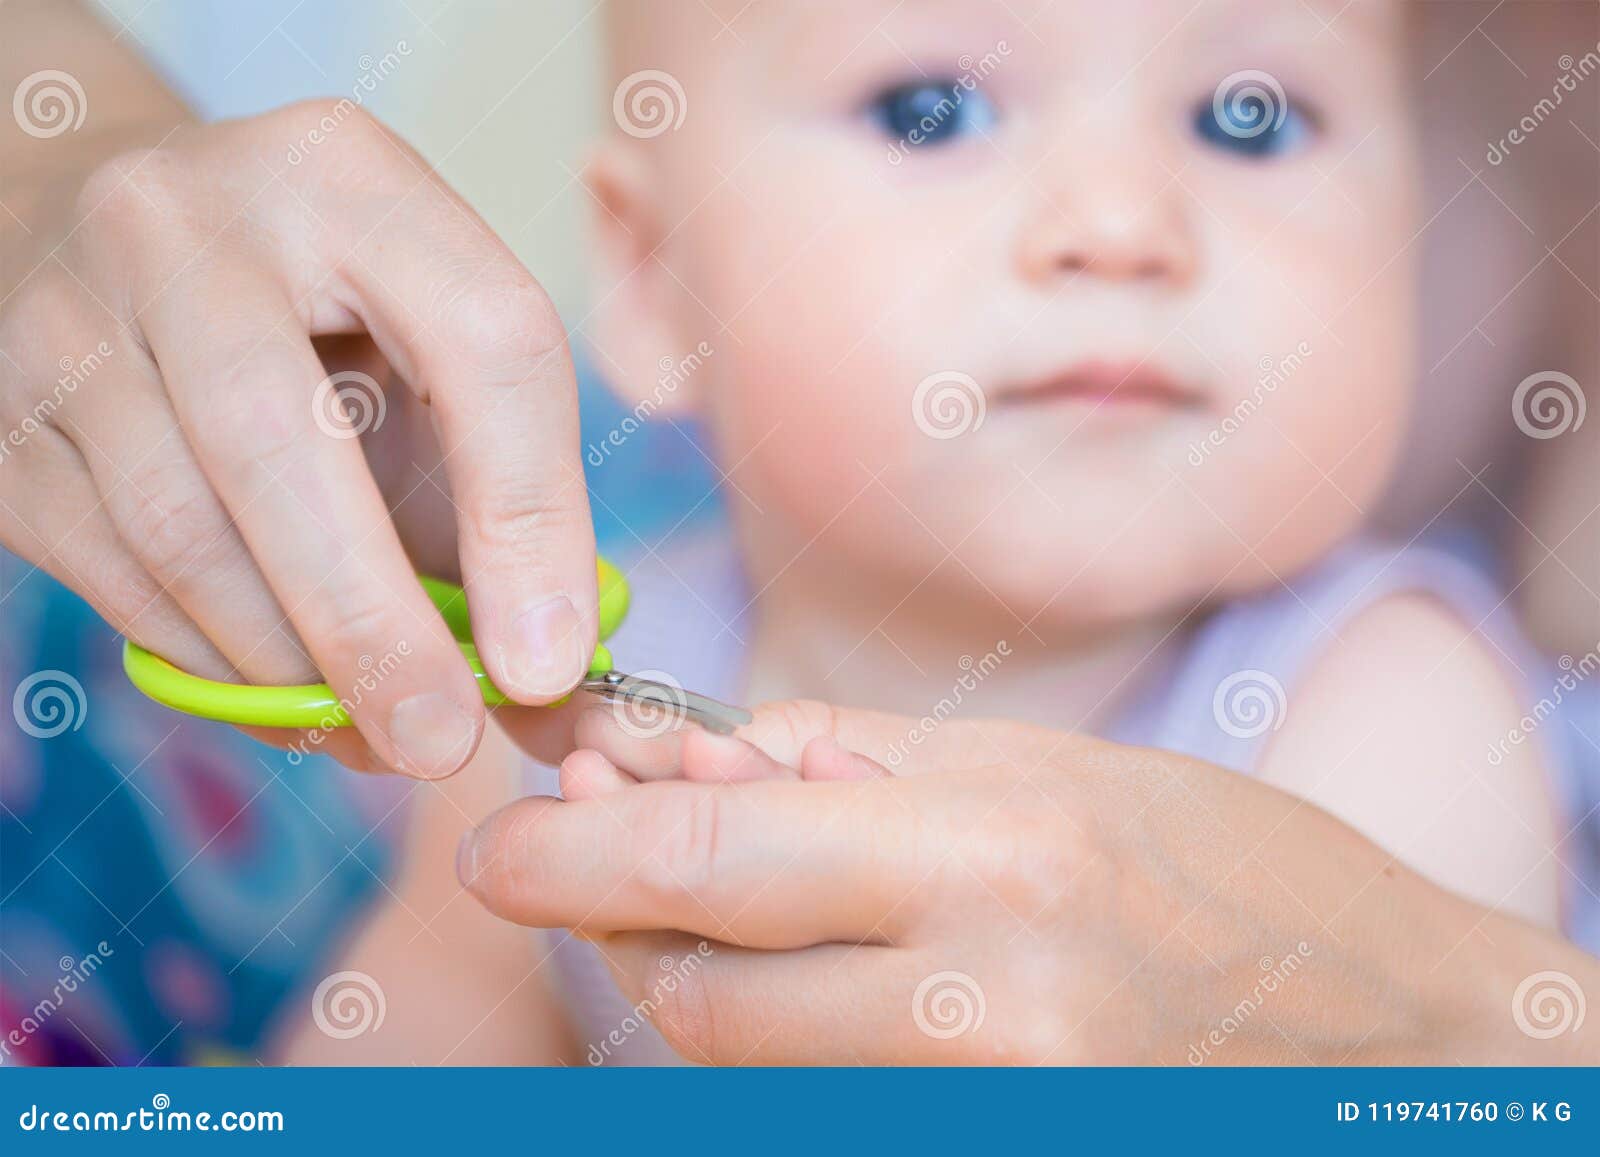 Close-up Mother Cutting Nail Of Baby With Safety Scissors ...